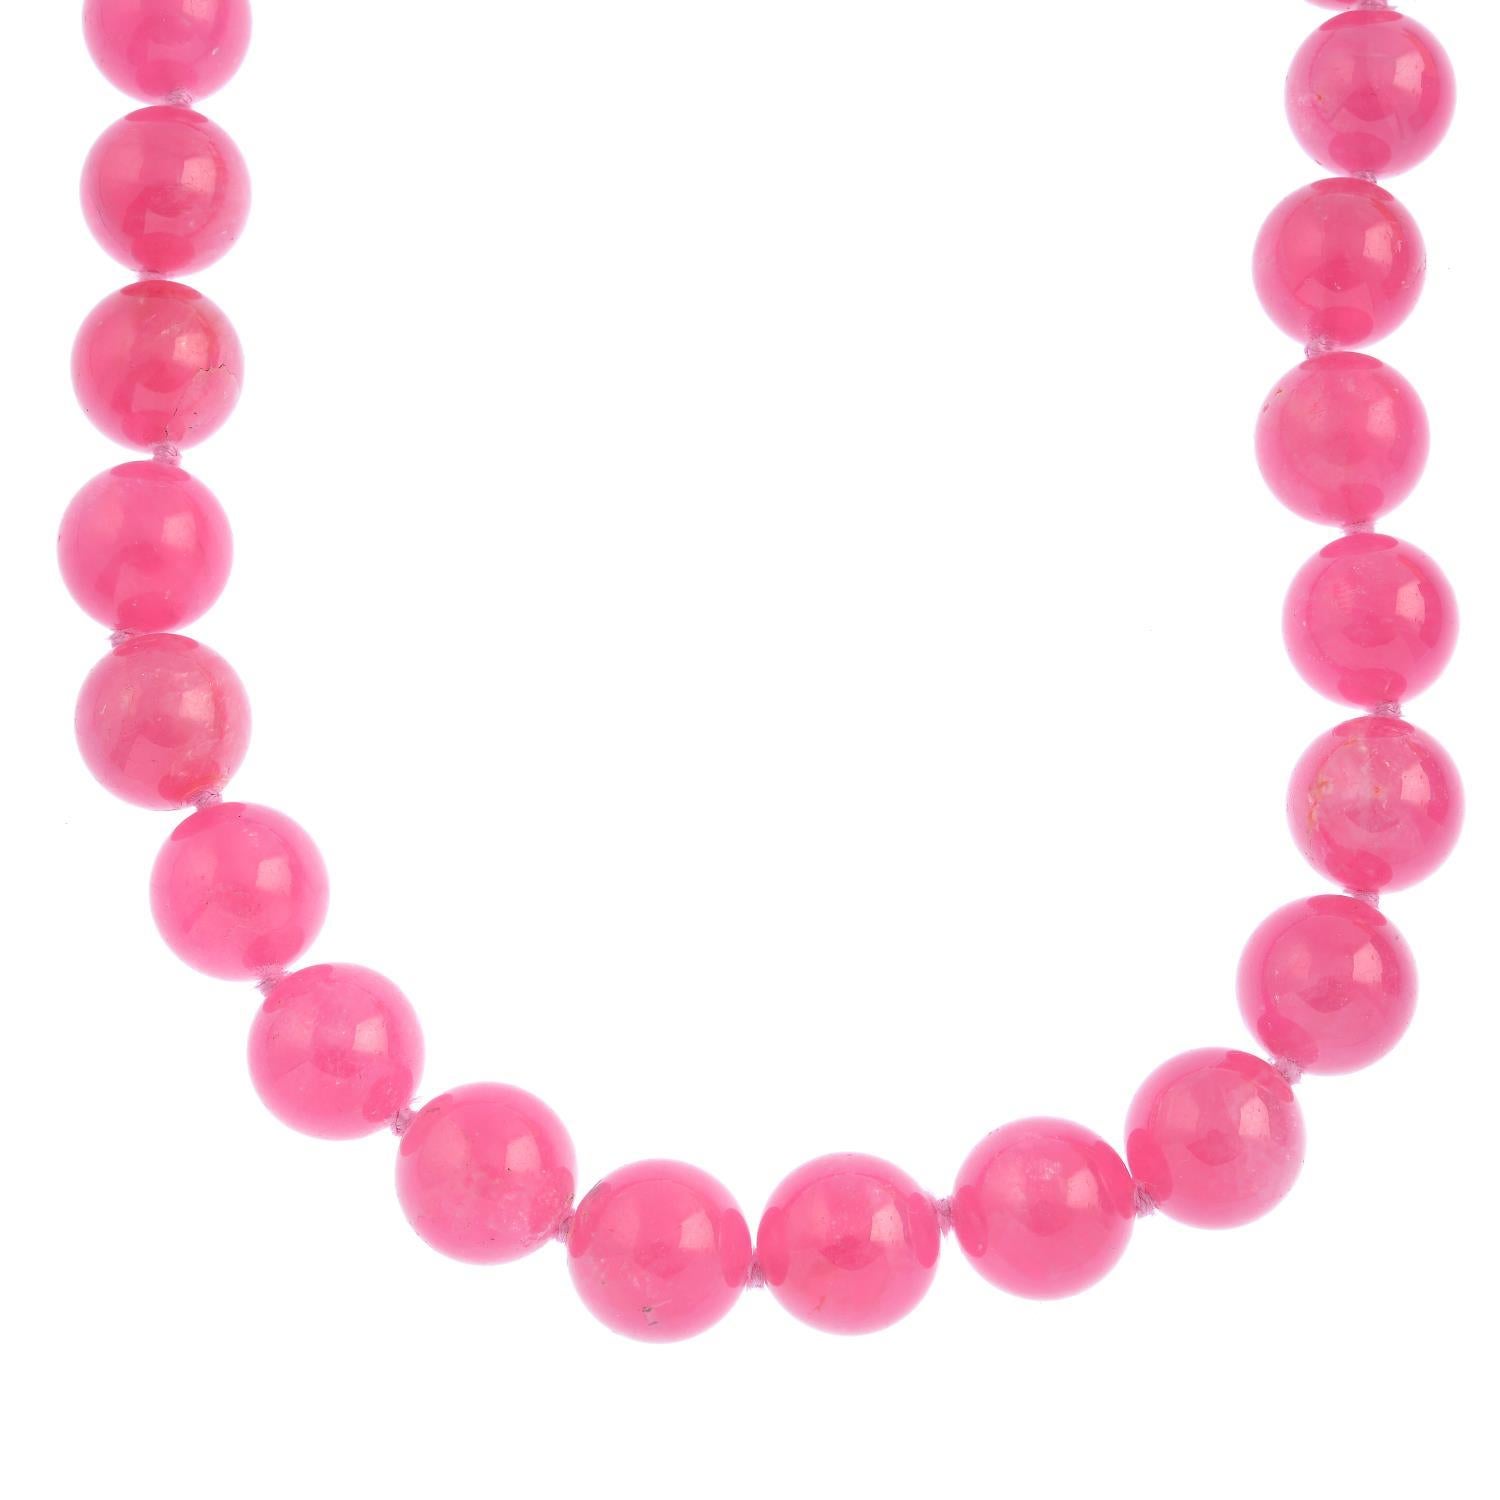 This is a classic; a silver rhodochrosite bead necklace by Paloma Picasso for Tiffany & Co. The necklace comprises thirty-one rhodochrosite beads in a deep vibrant pink colour, and fastens securely with an interlocking hoop clasp. 
The estimated